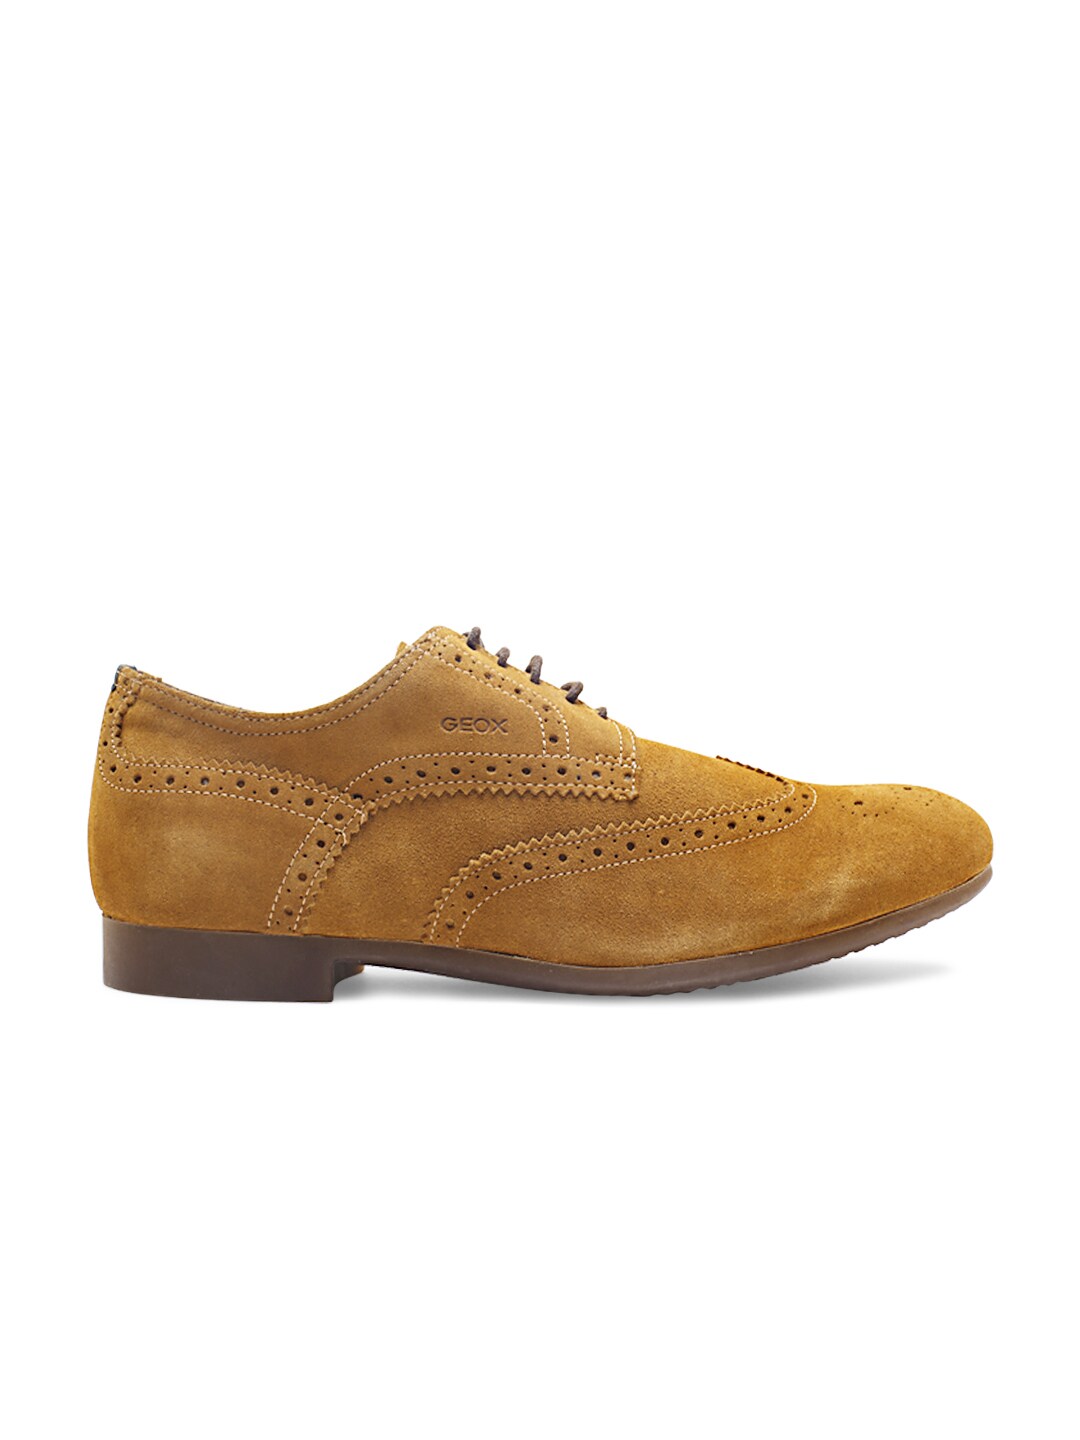 red tape genuine leather formal shoes